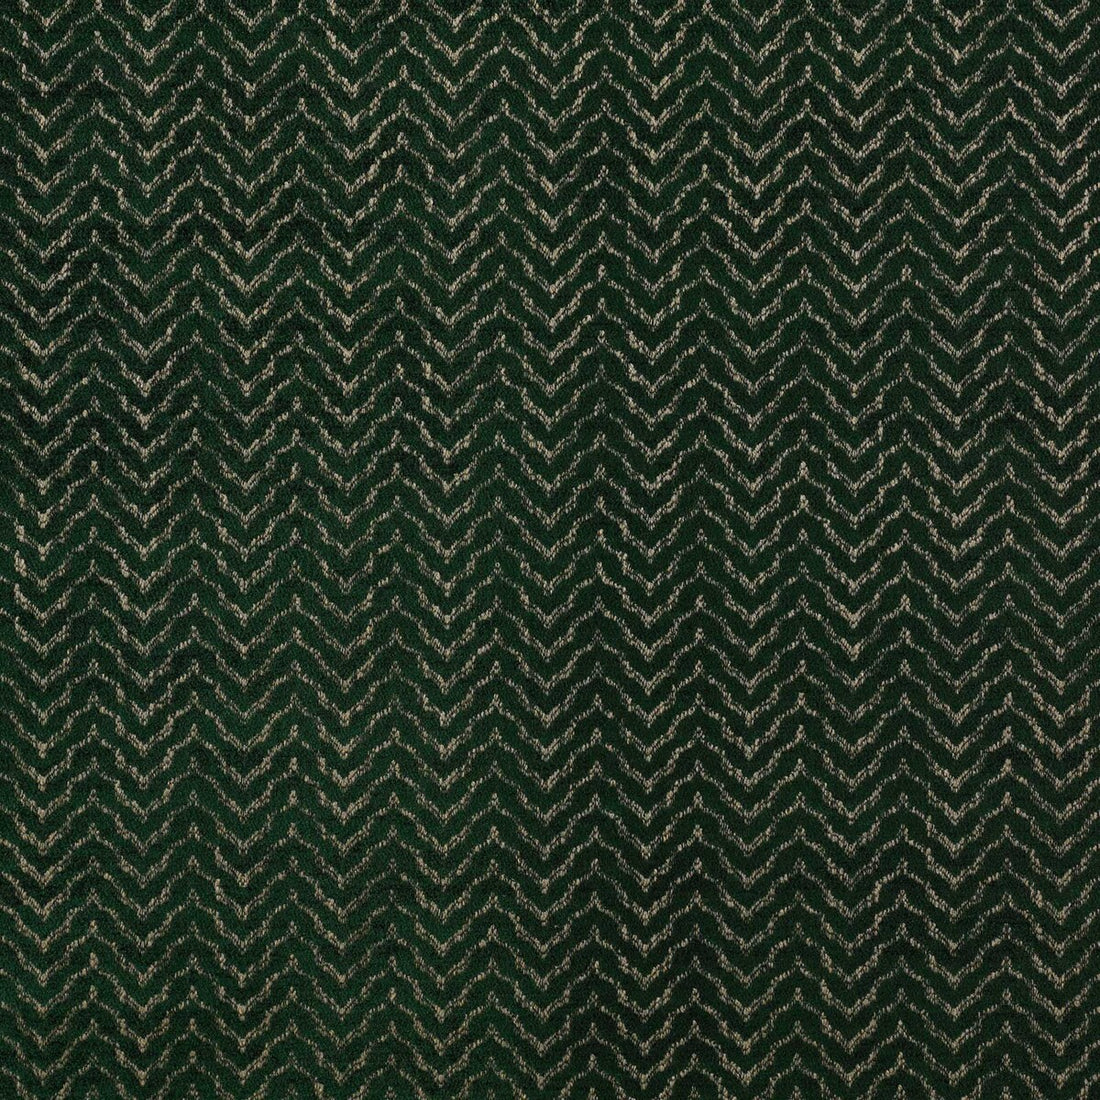 Sella fabric in verde color - pattern GDT5180.012.0 - by Gaston y Daniela in the Lorenzo Castillo II collection